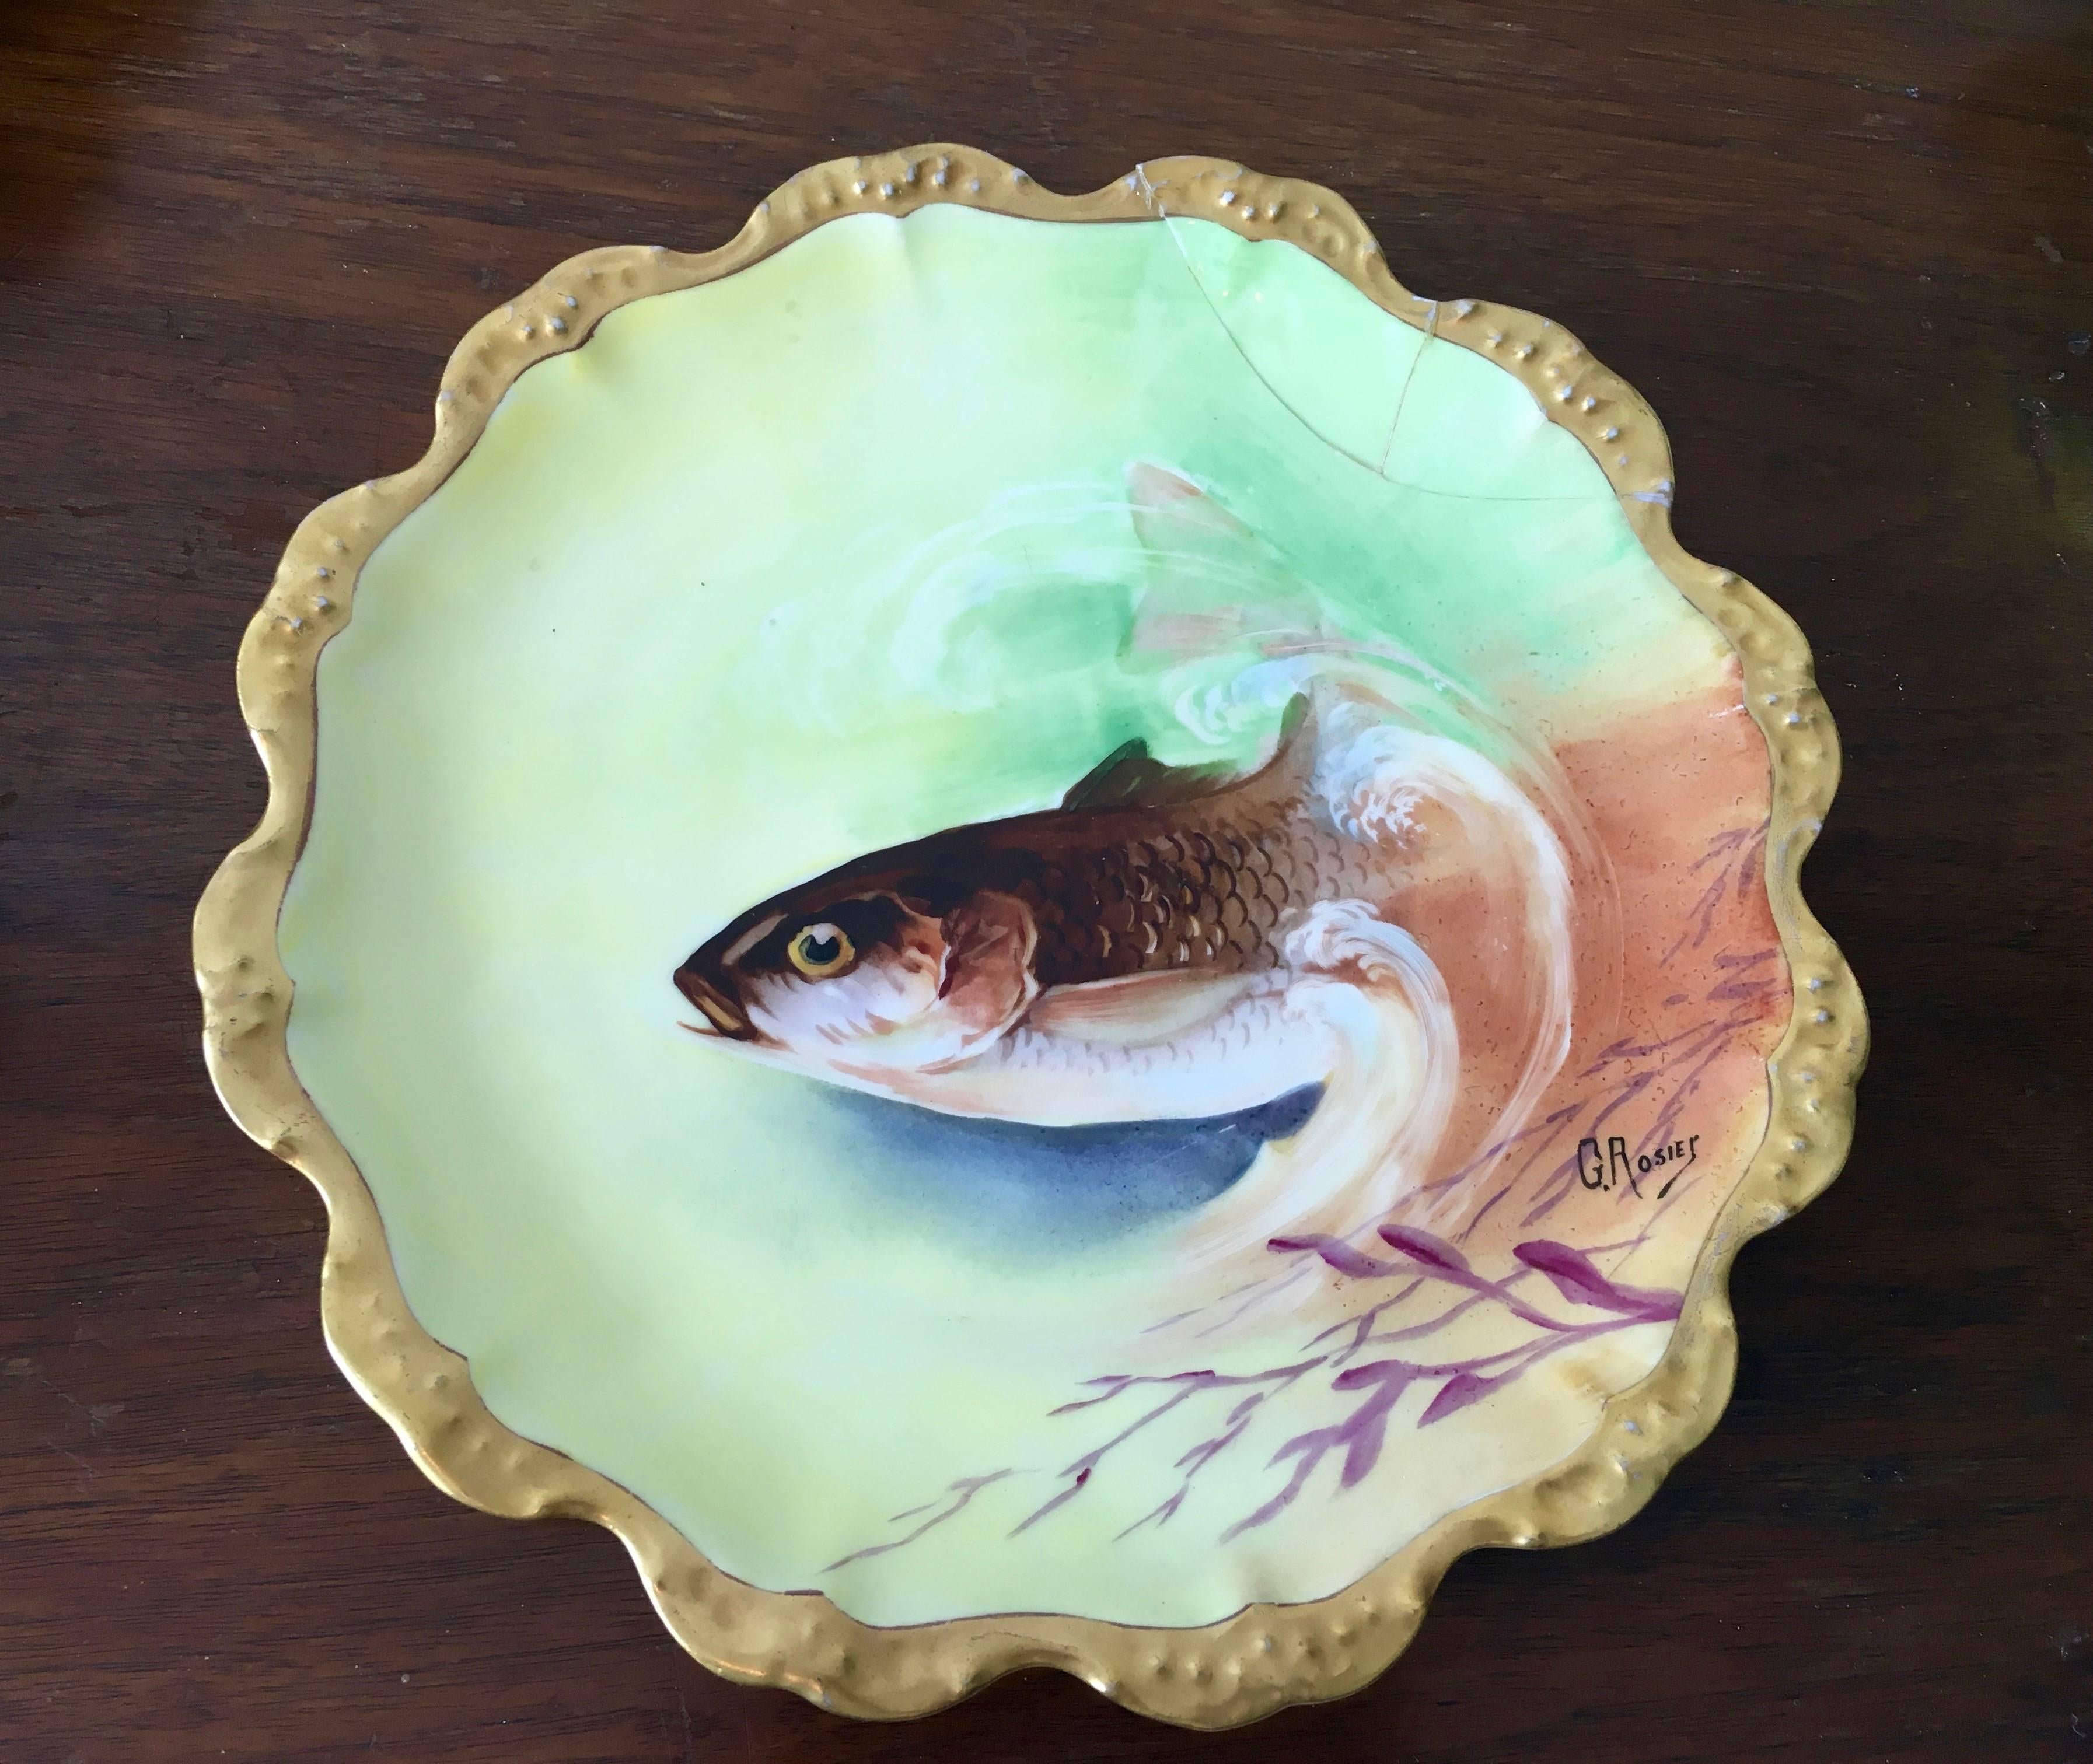 20th Century Limoges Hand-Painted Fish Service Set